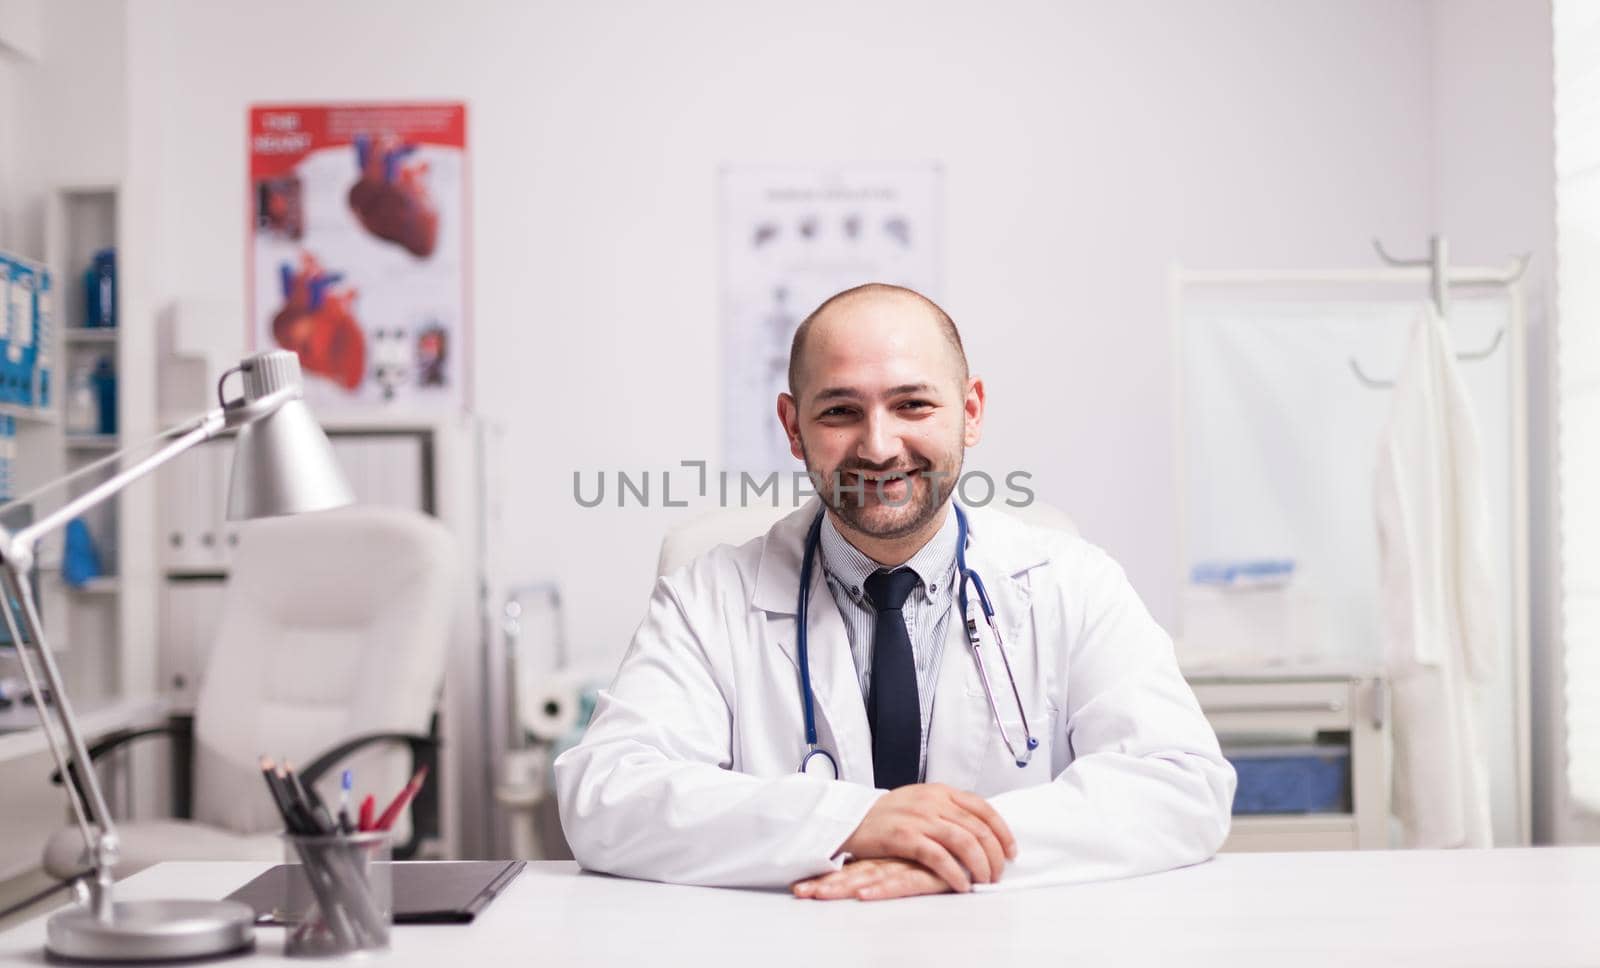 Portrait of successful young doctor in hospital office wearing white coat smiling at camera.